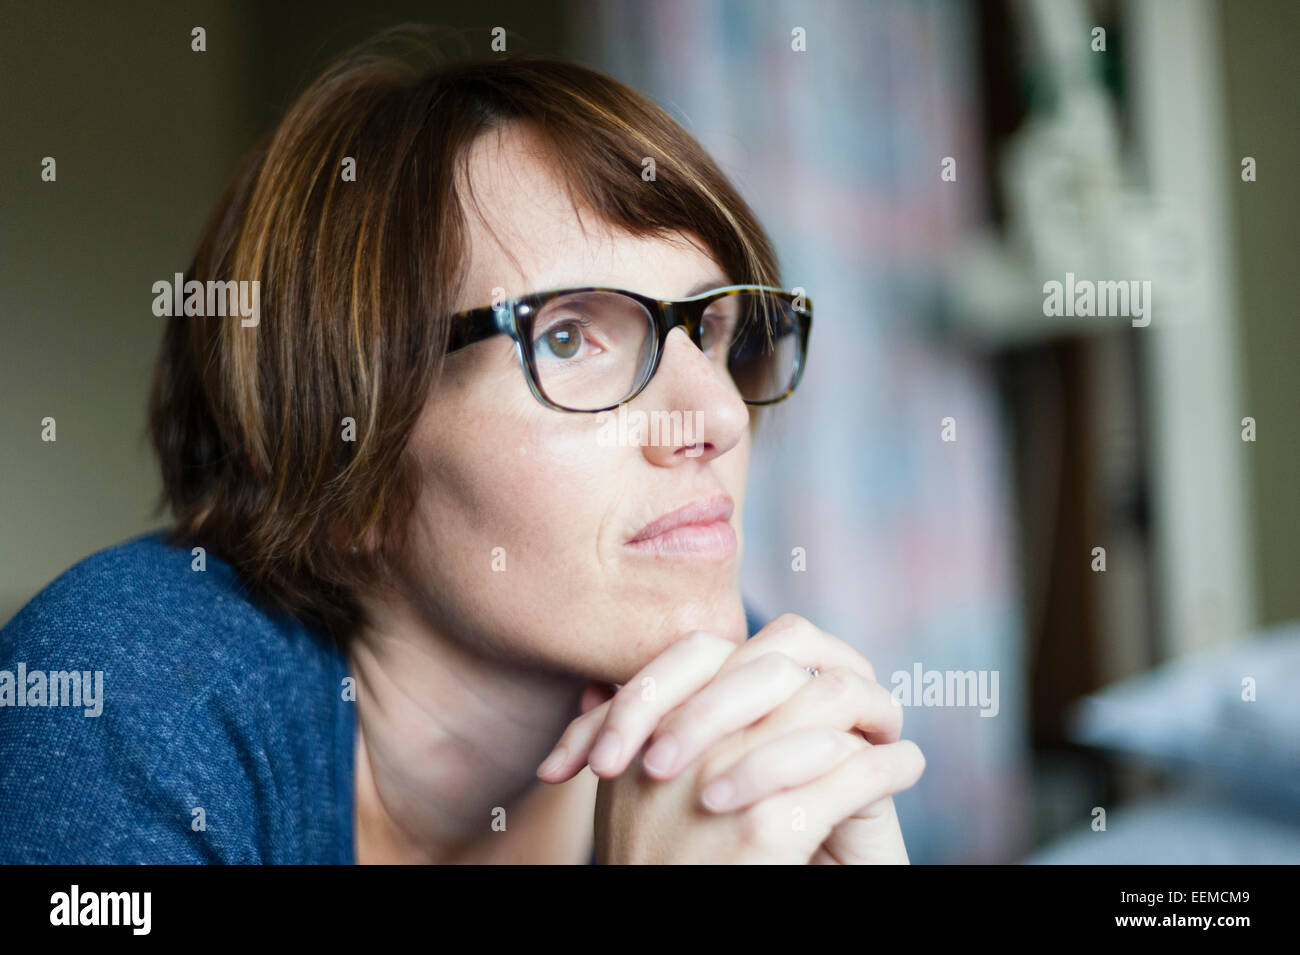 Caucasian woman thinking with hands clasped Stock Photo